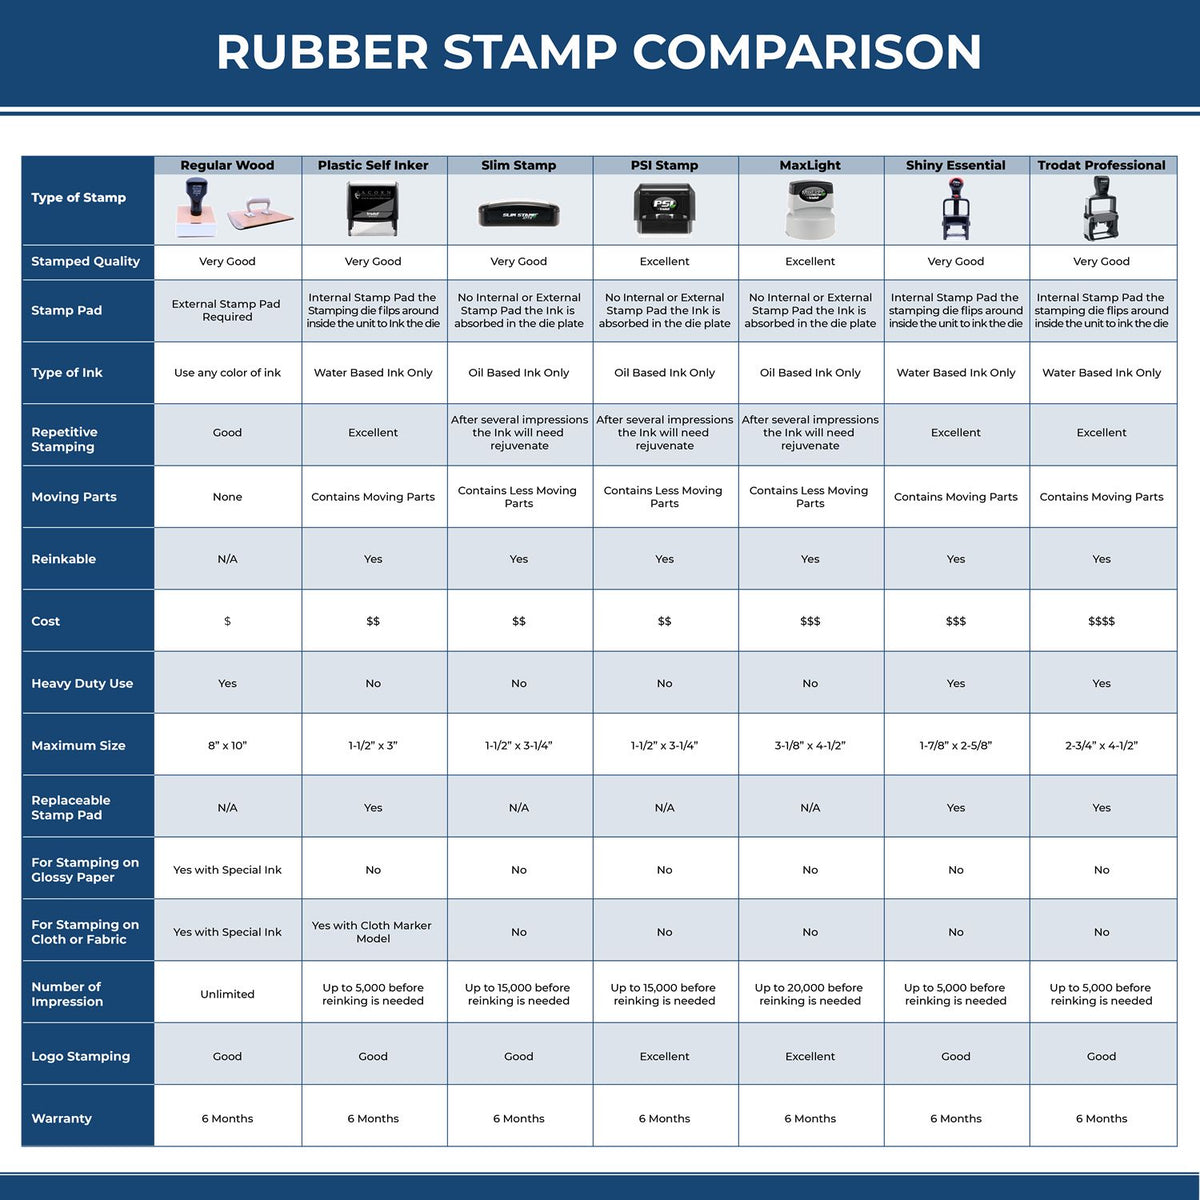 A comparison chart for the different types of mount models available for the Super Slim Arkansas Notary Public Stamp.